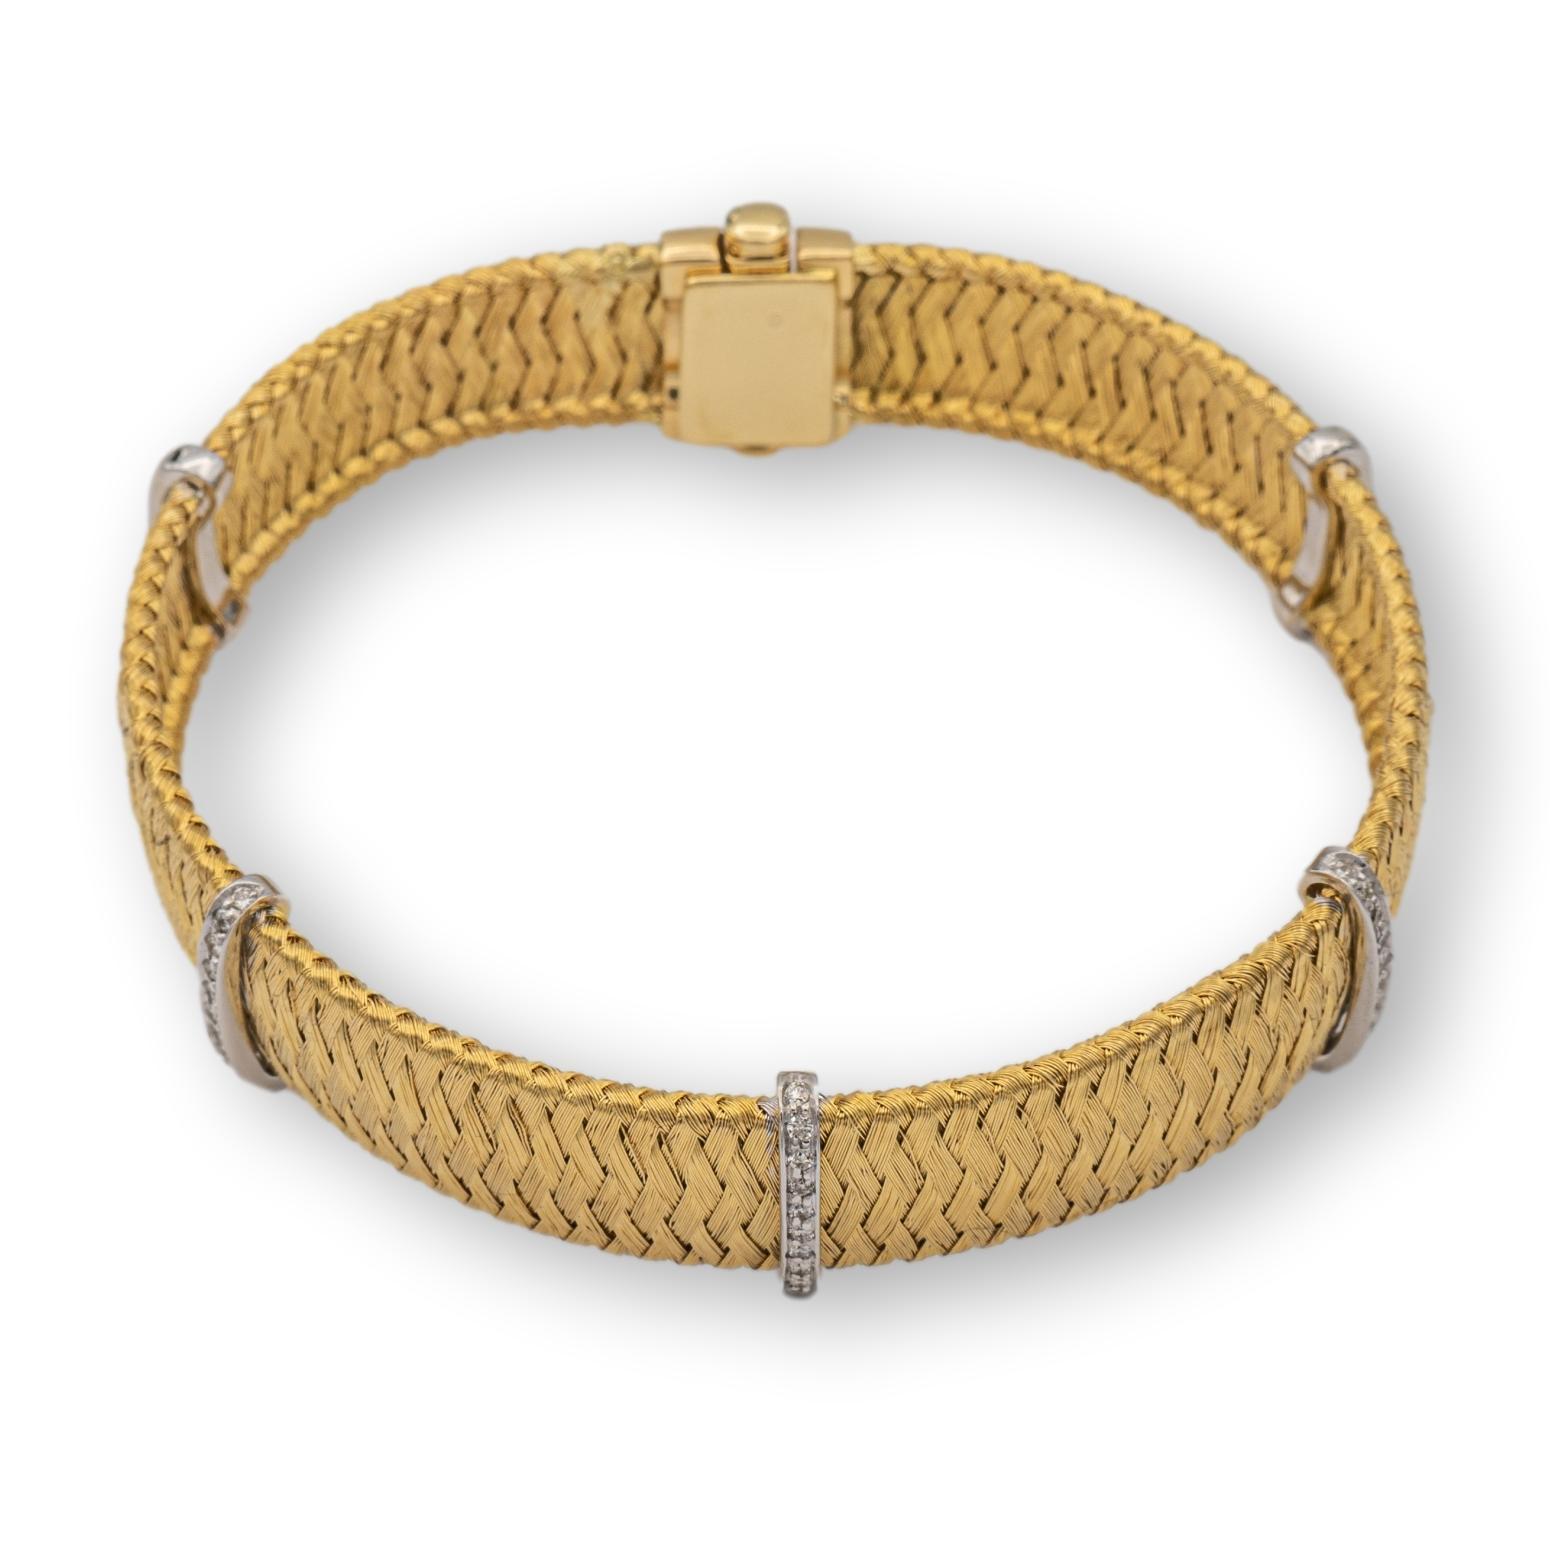 Vintage Roberto Coin silk weave bracelet finely crafted in 18 Karat yellow gold featuring 5 bar stations in 18 karat white gold , 3 of them studded with bead set round brilliant cut diamonds weighing 0.35 cts total weight approximately. Bracelet